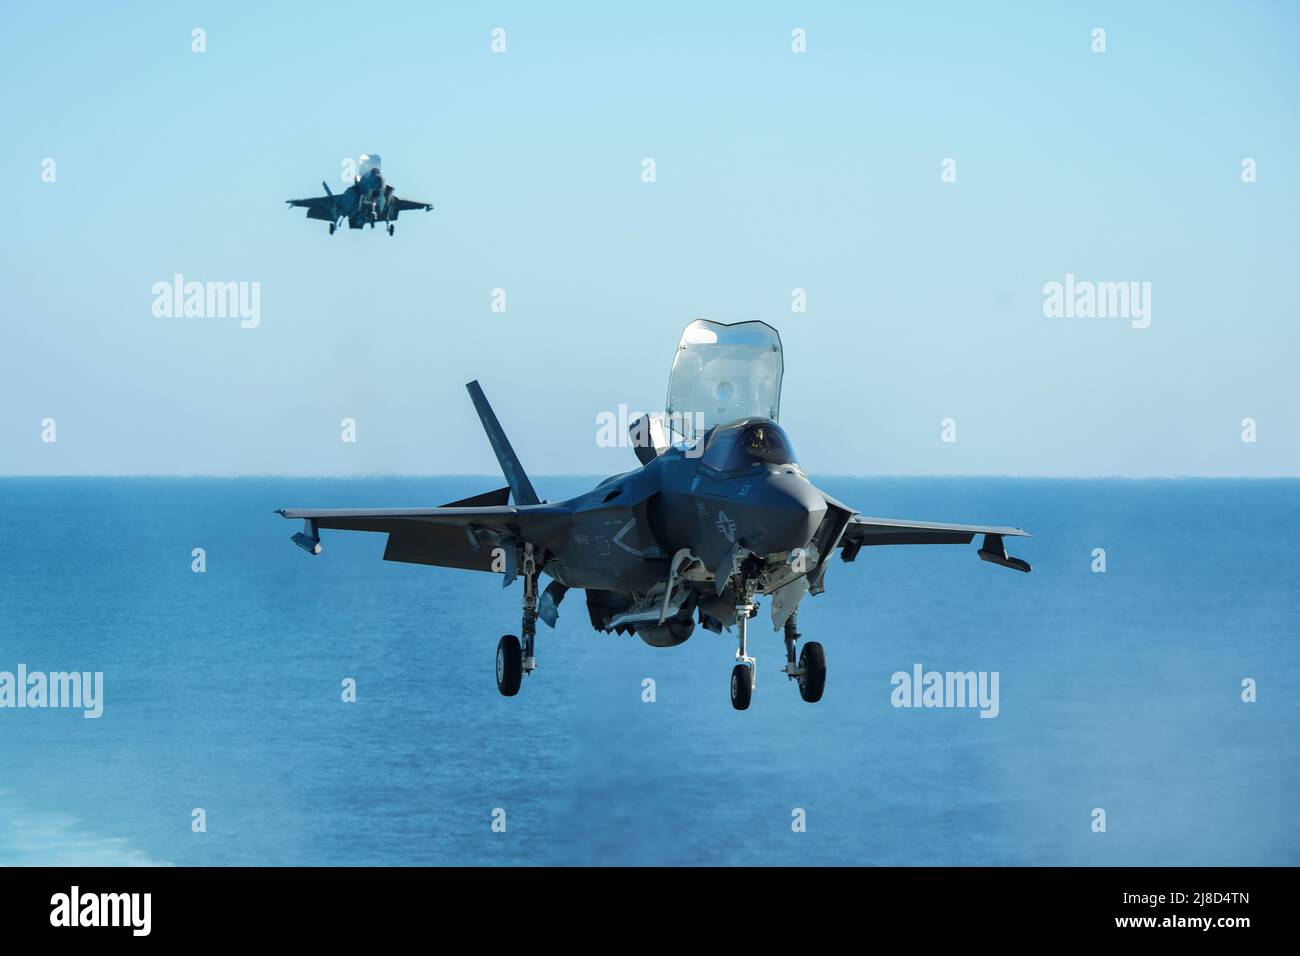 U.S. Marine Corps F-35B Lightning II fighter aircraft, attached to the Knightriders of Marine Medium Tiltrotor Squadron 164, approach for a vertical landing on the flight deck of the Wasp-class amphibious assault ship USS Makin Island, December 18, 2020 operating on the Indian Ocean. Stock Photo